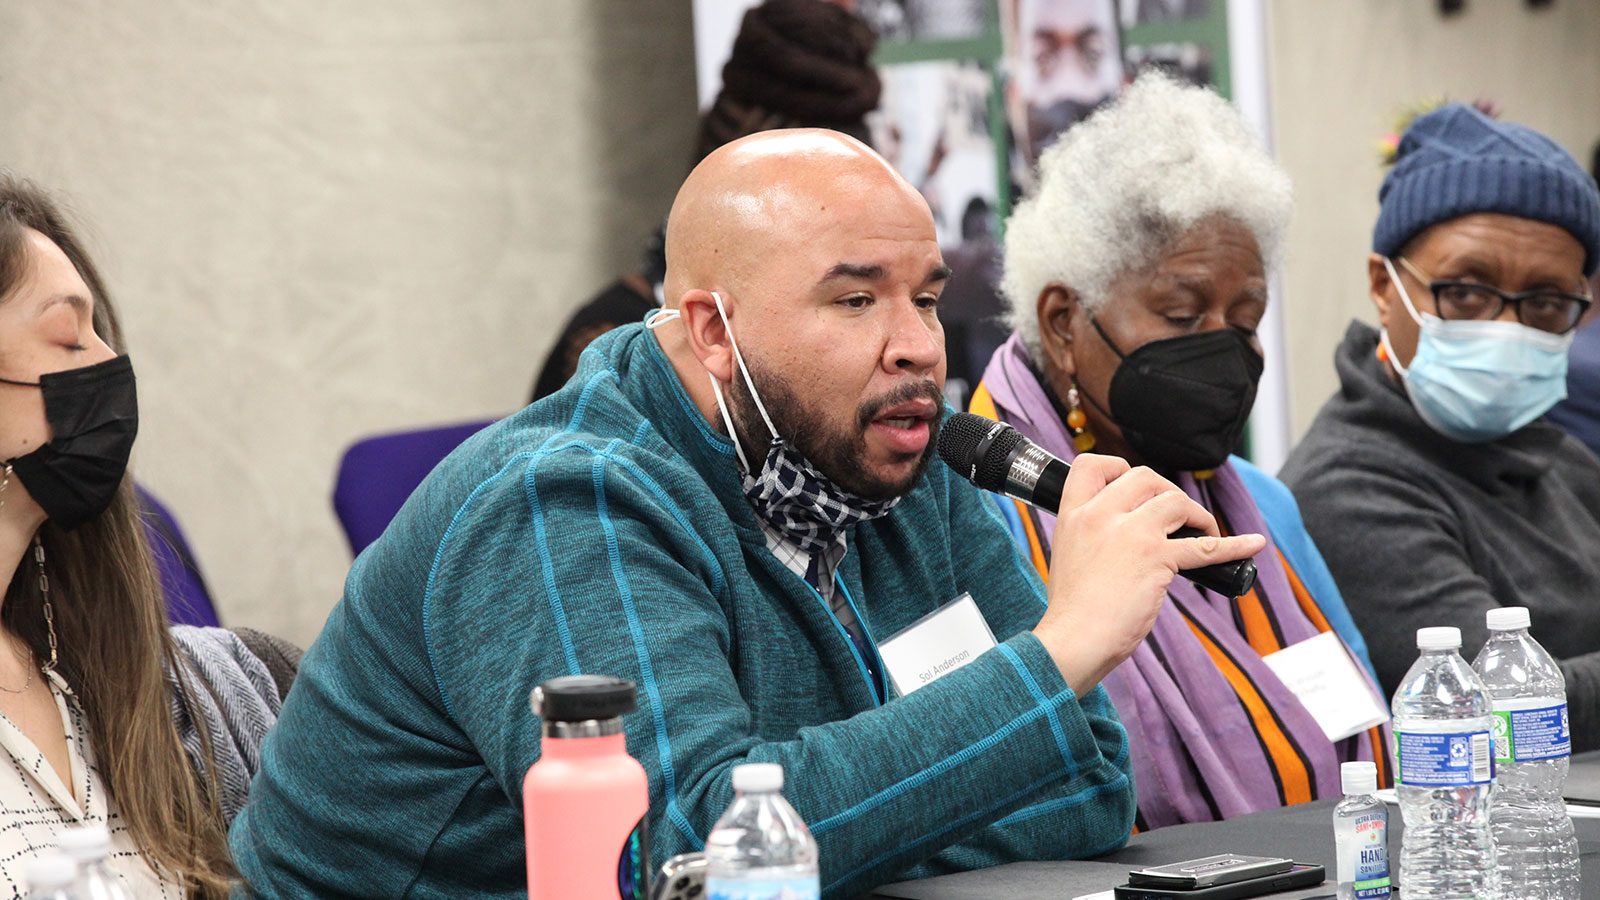 December 2021 National Symposium on Municipal and Local Reparations